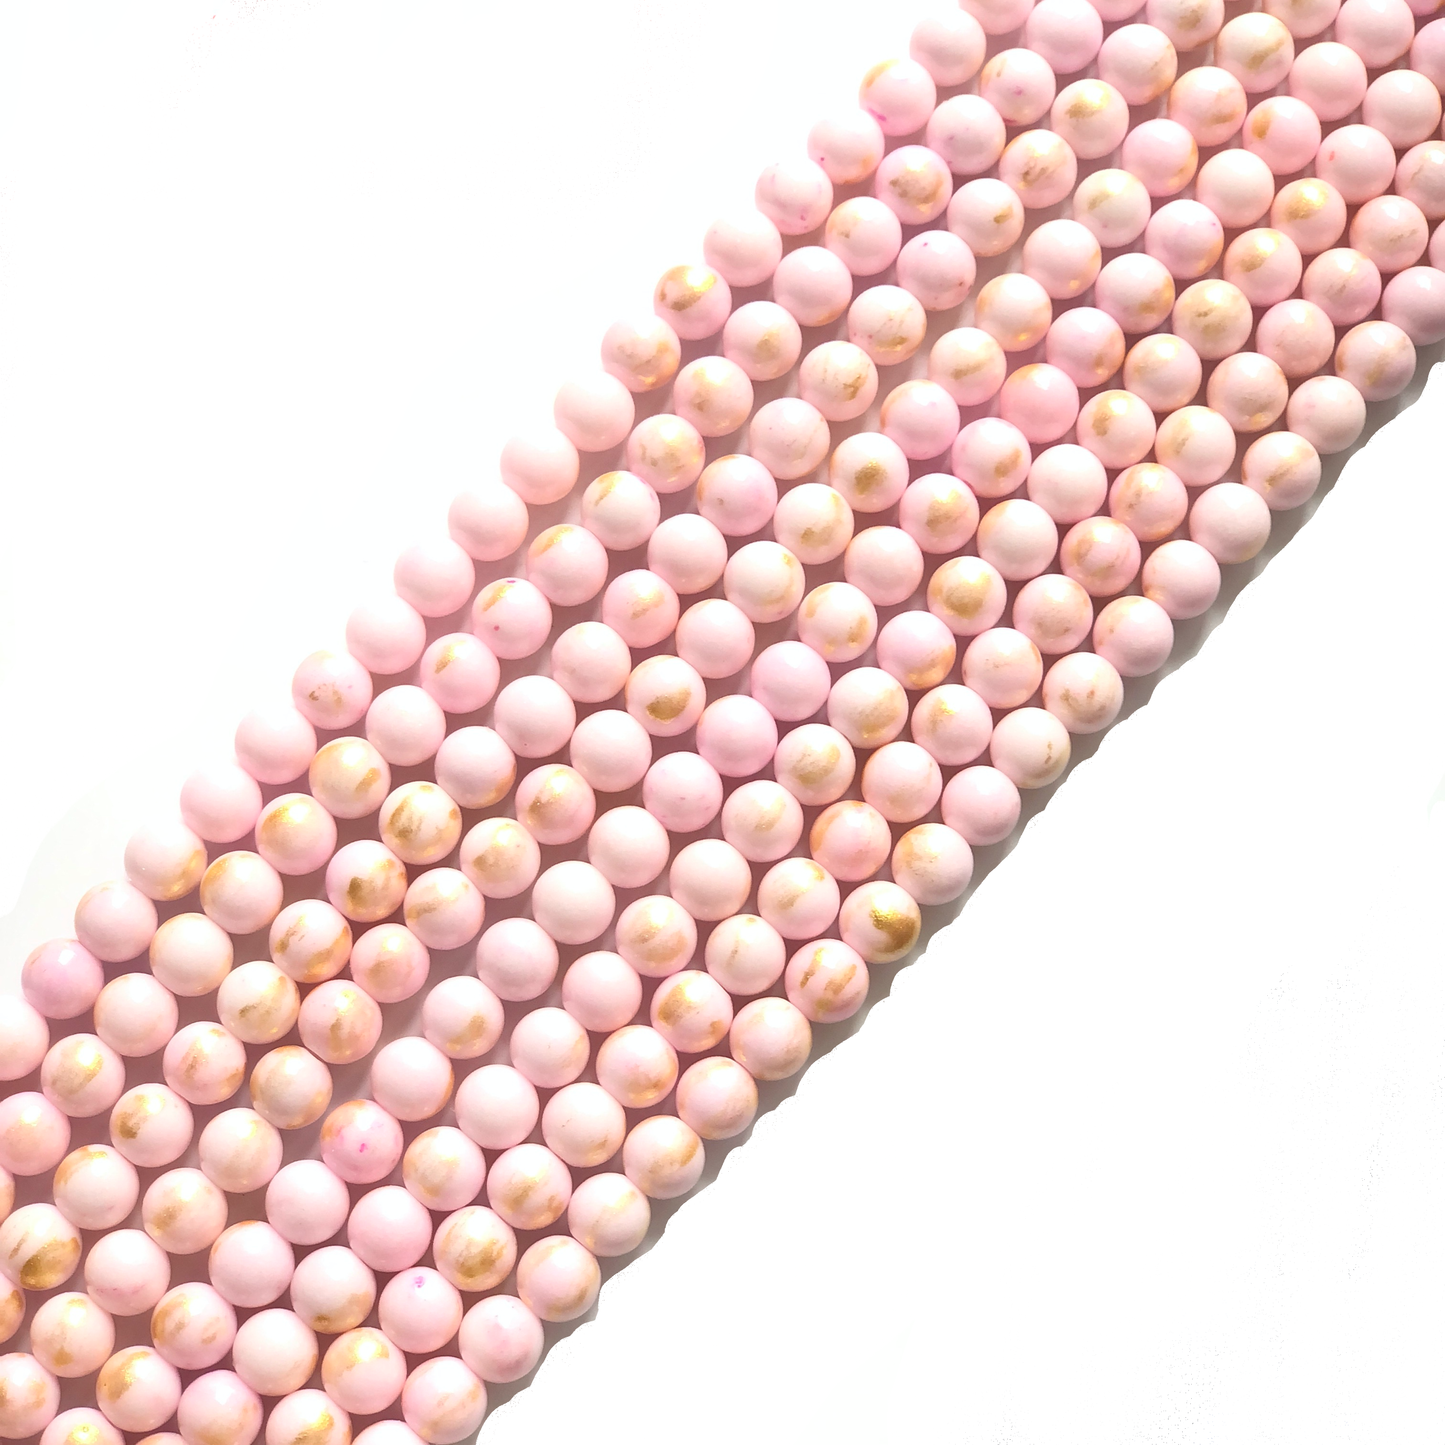 2 Strands/lot 8mm, 10mm Light Pink Gold Plated Jade Round Stone Beads Stone Beads 8mm Stone Beads Breast Cancer Awareness Gold Plated Jade Beads Round Jade Beads Charms Beads Beyond